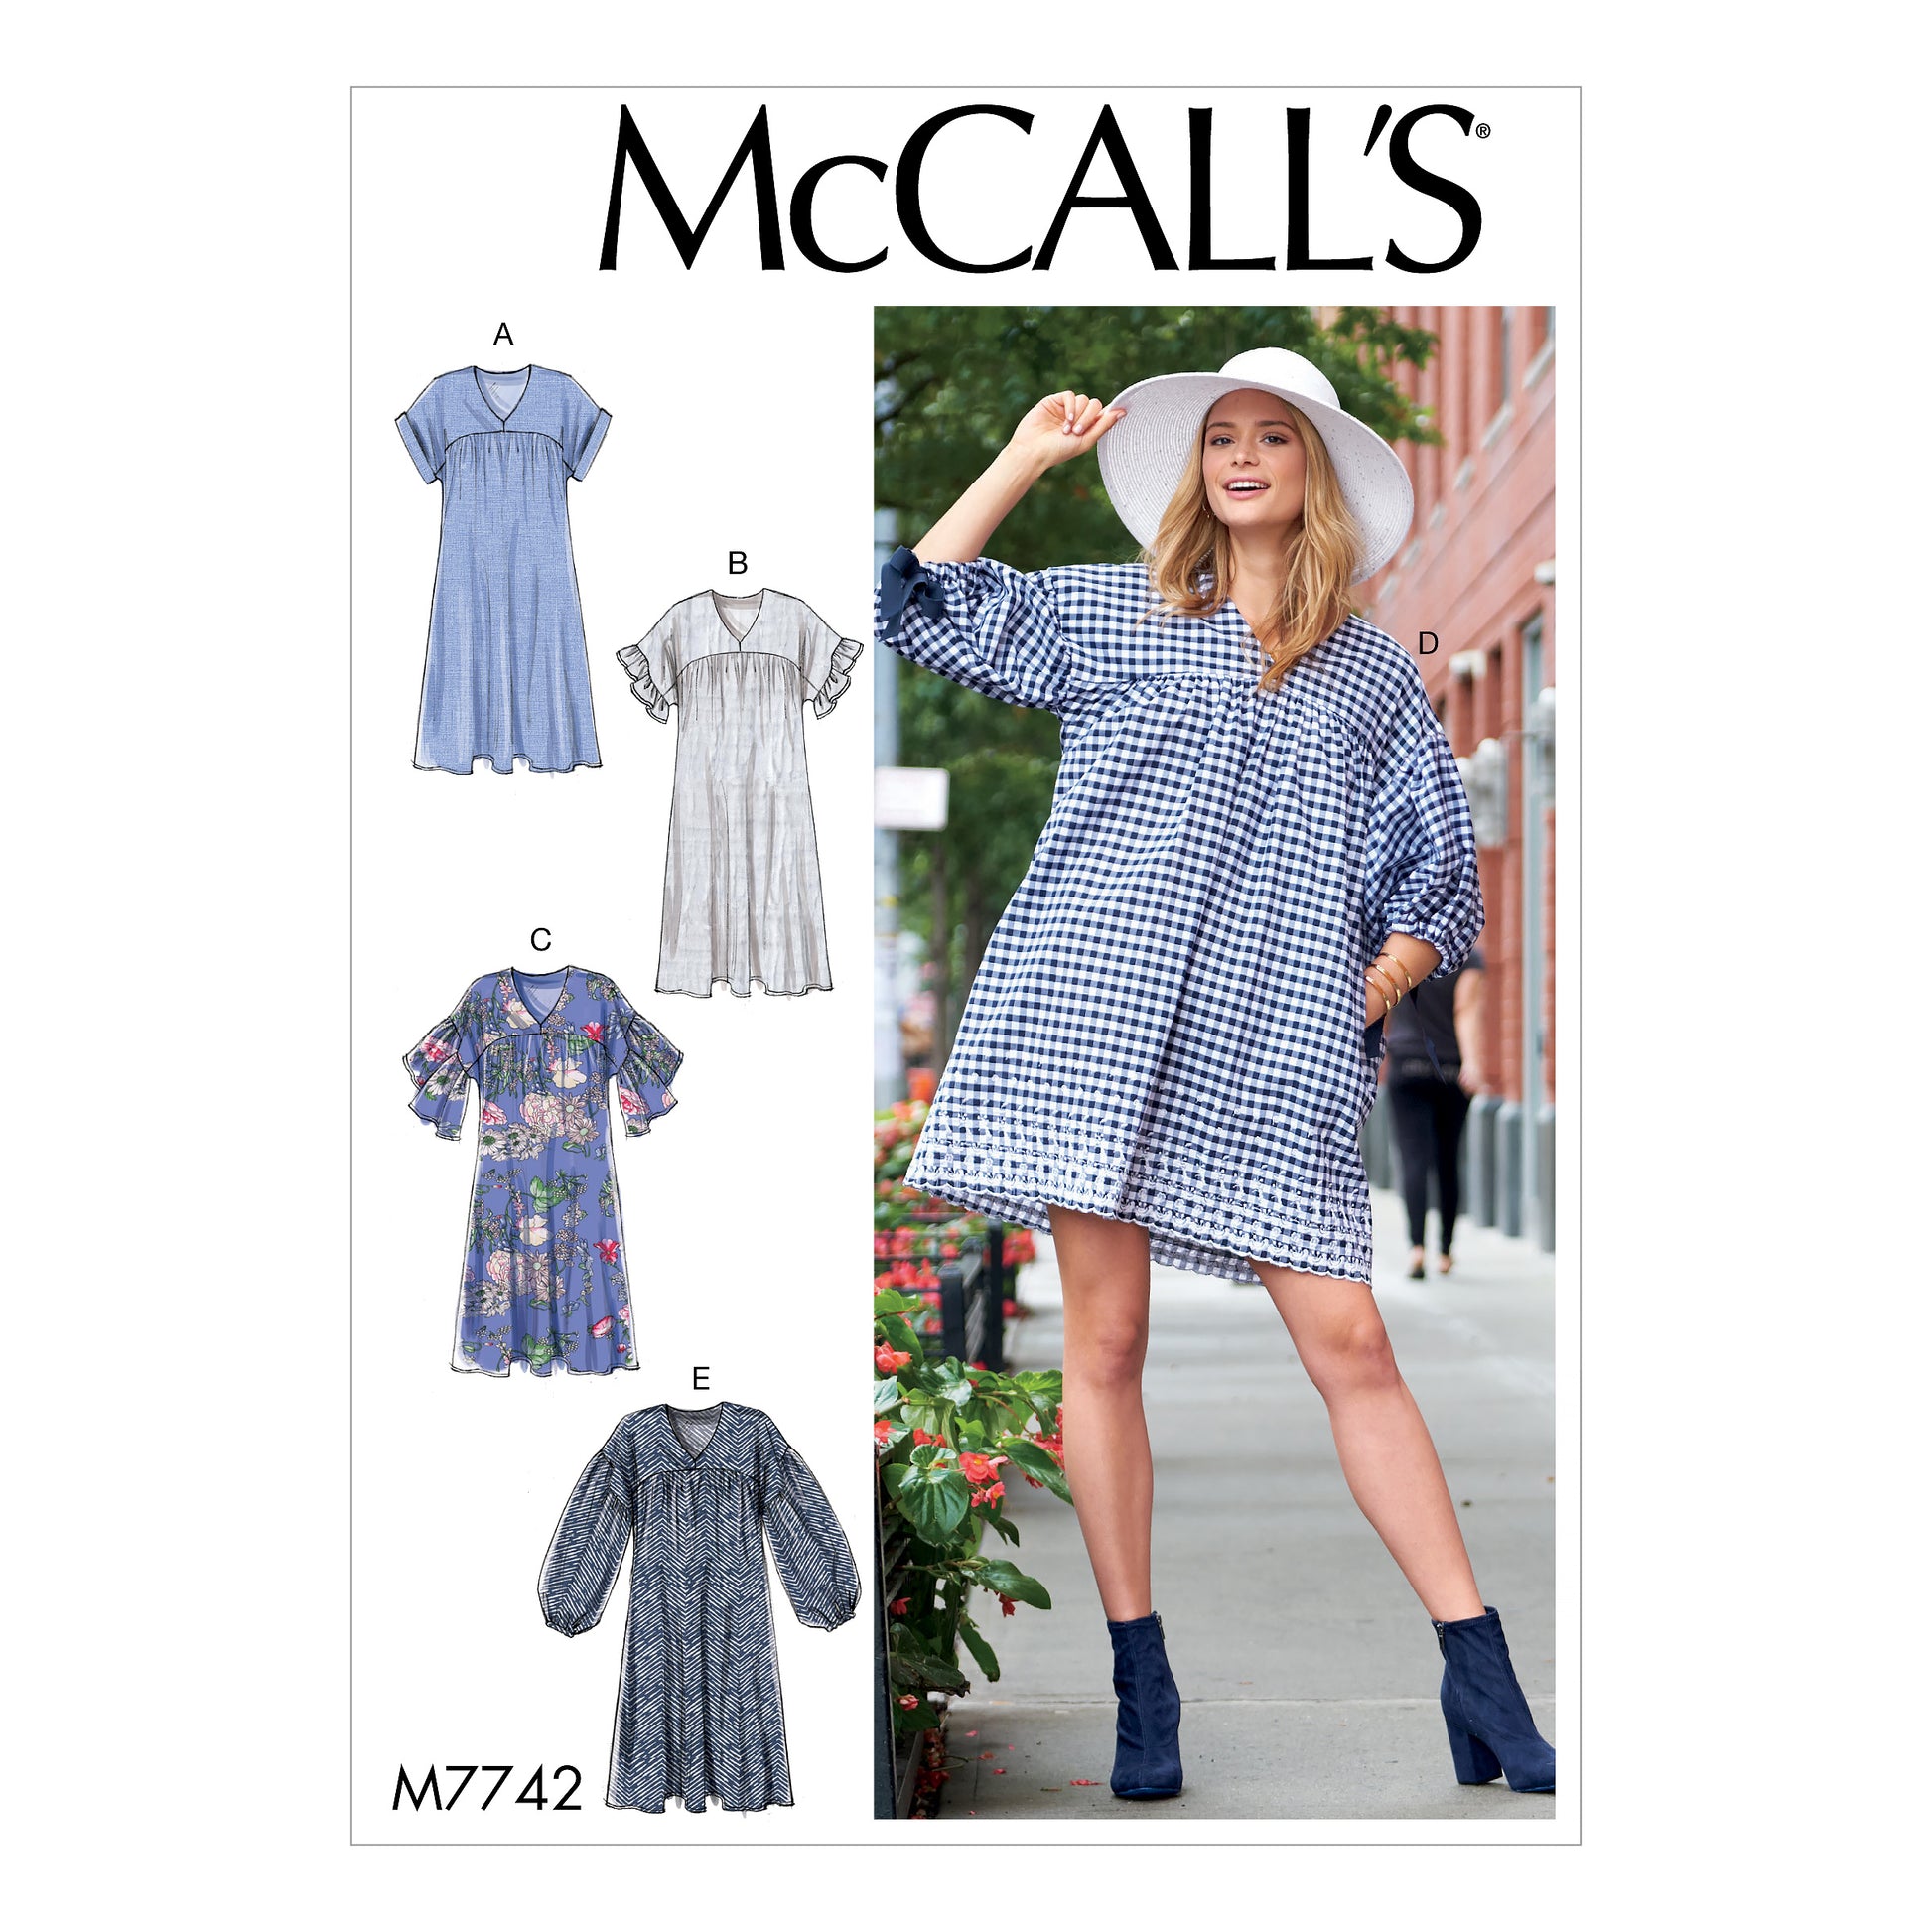 McCall's Pattern 4256 - Size Y (Xsm, Sml, Med)